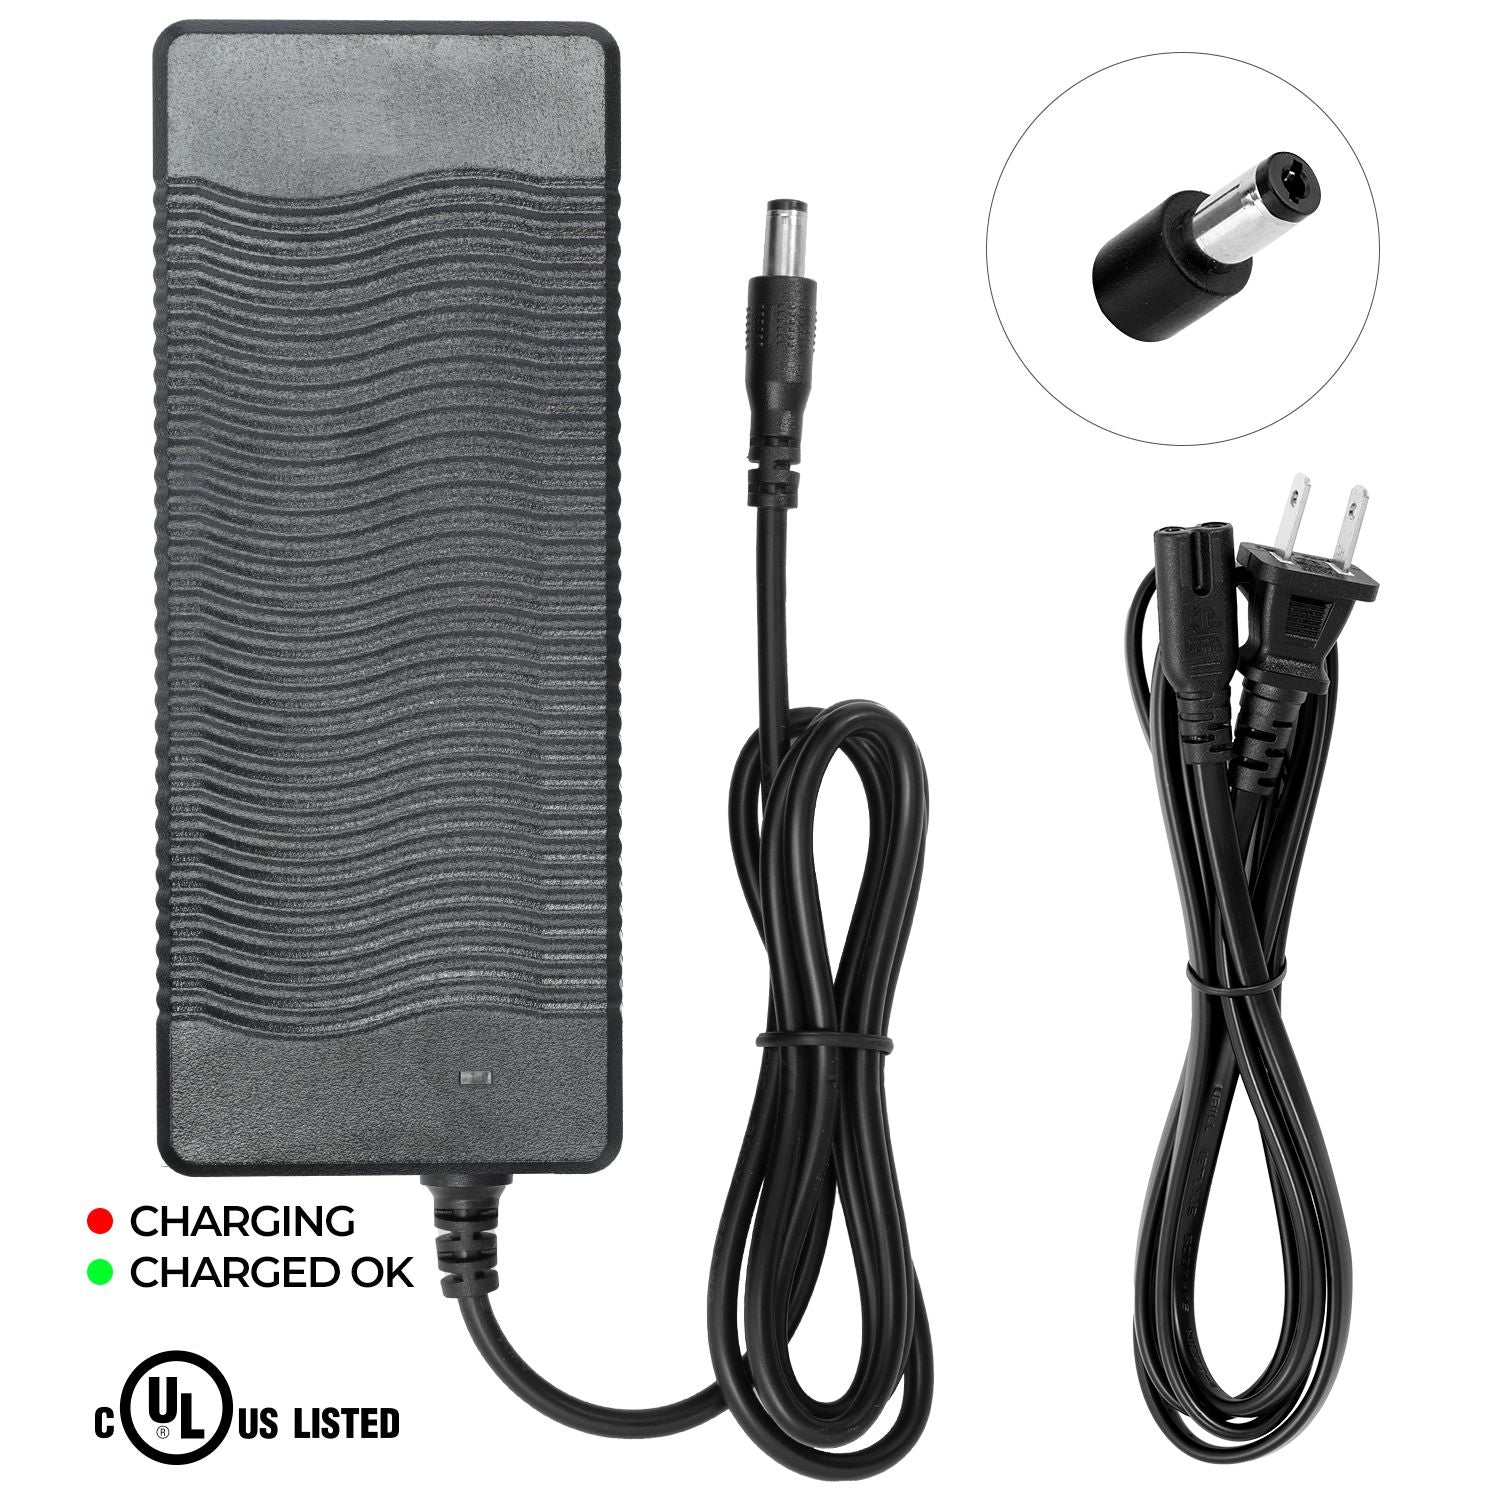 UL Listed Charger for Rad Power eBikes (For 48V Battery Models Only)